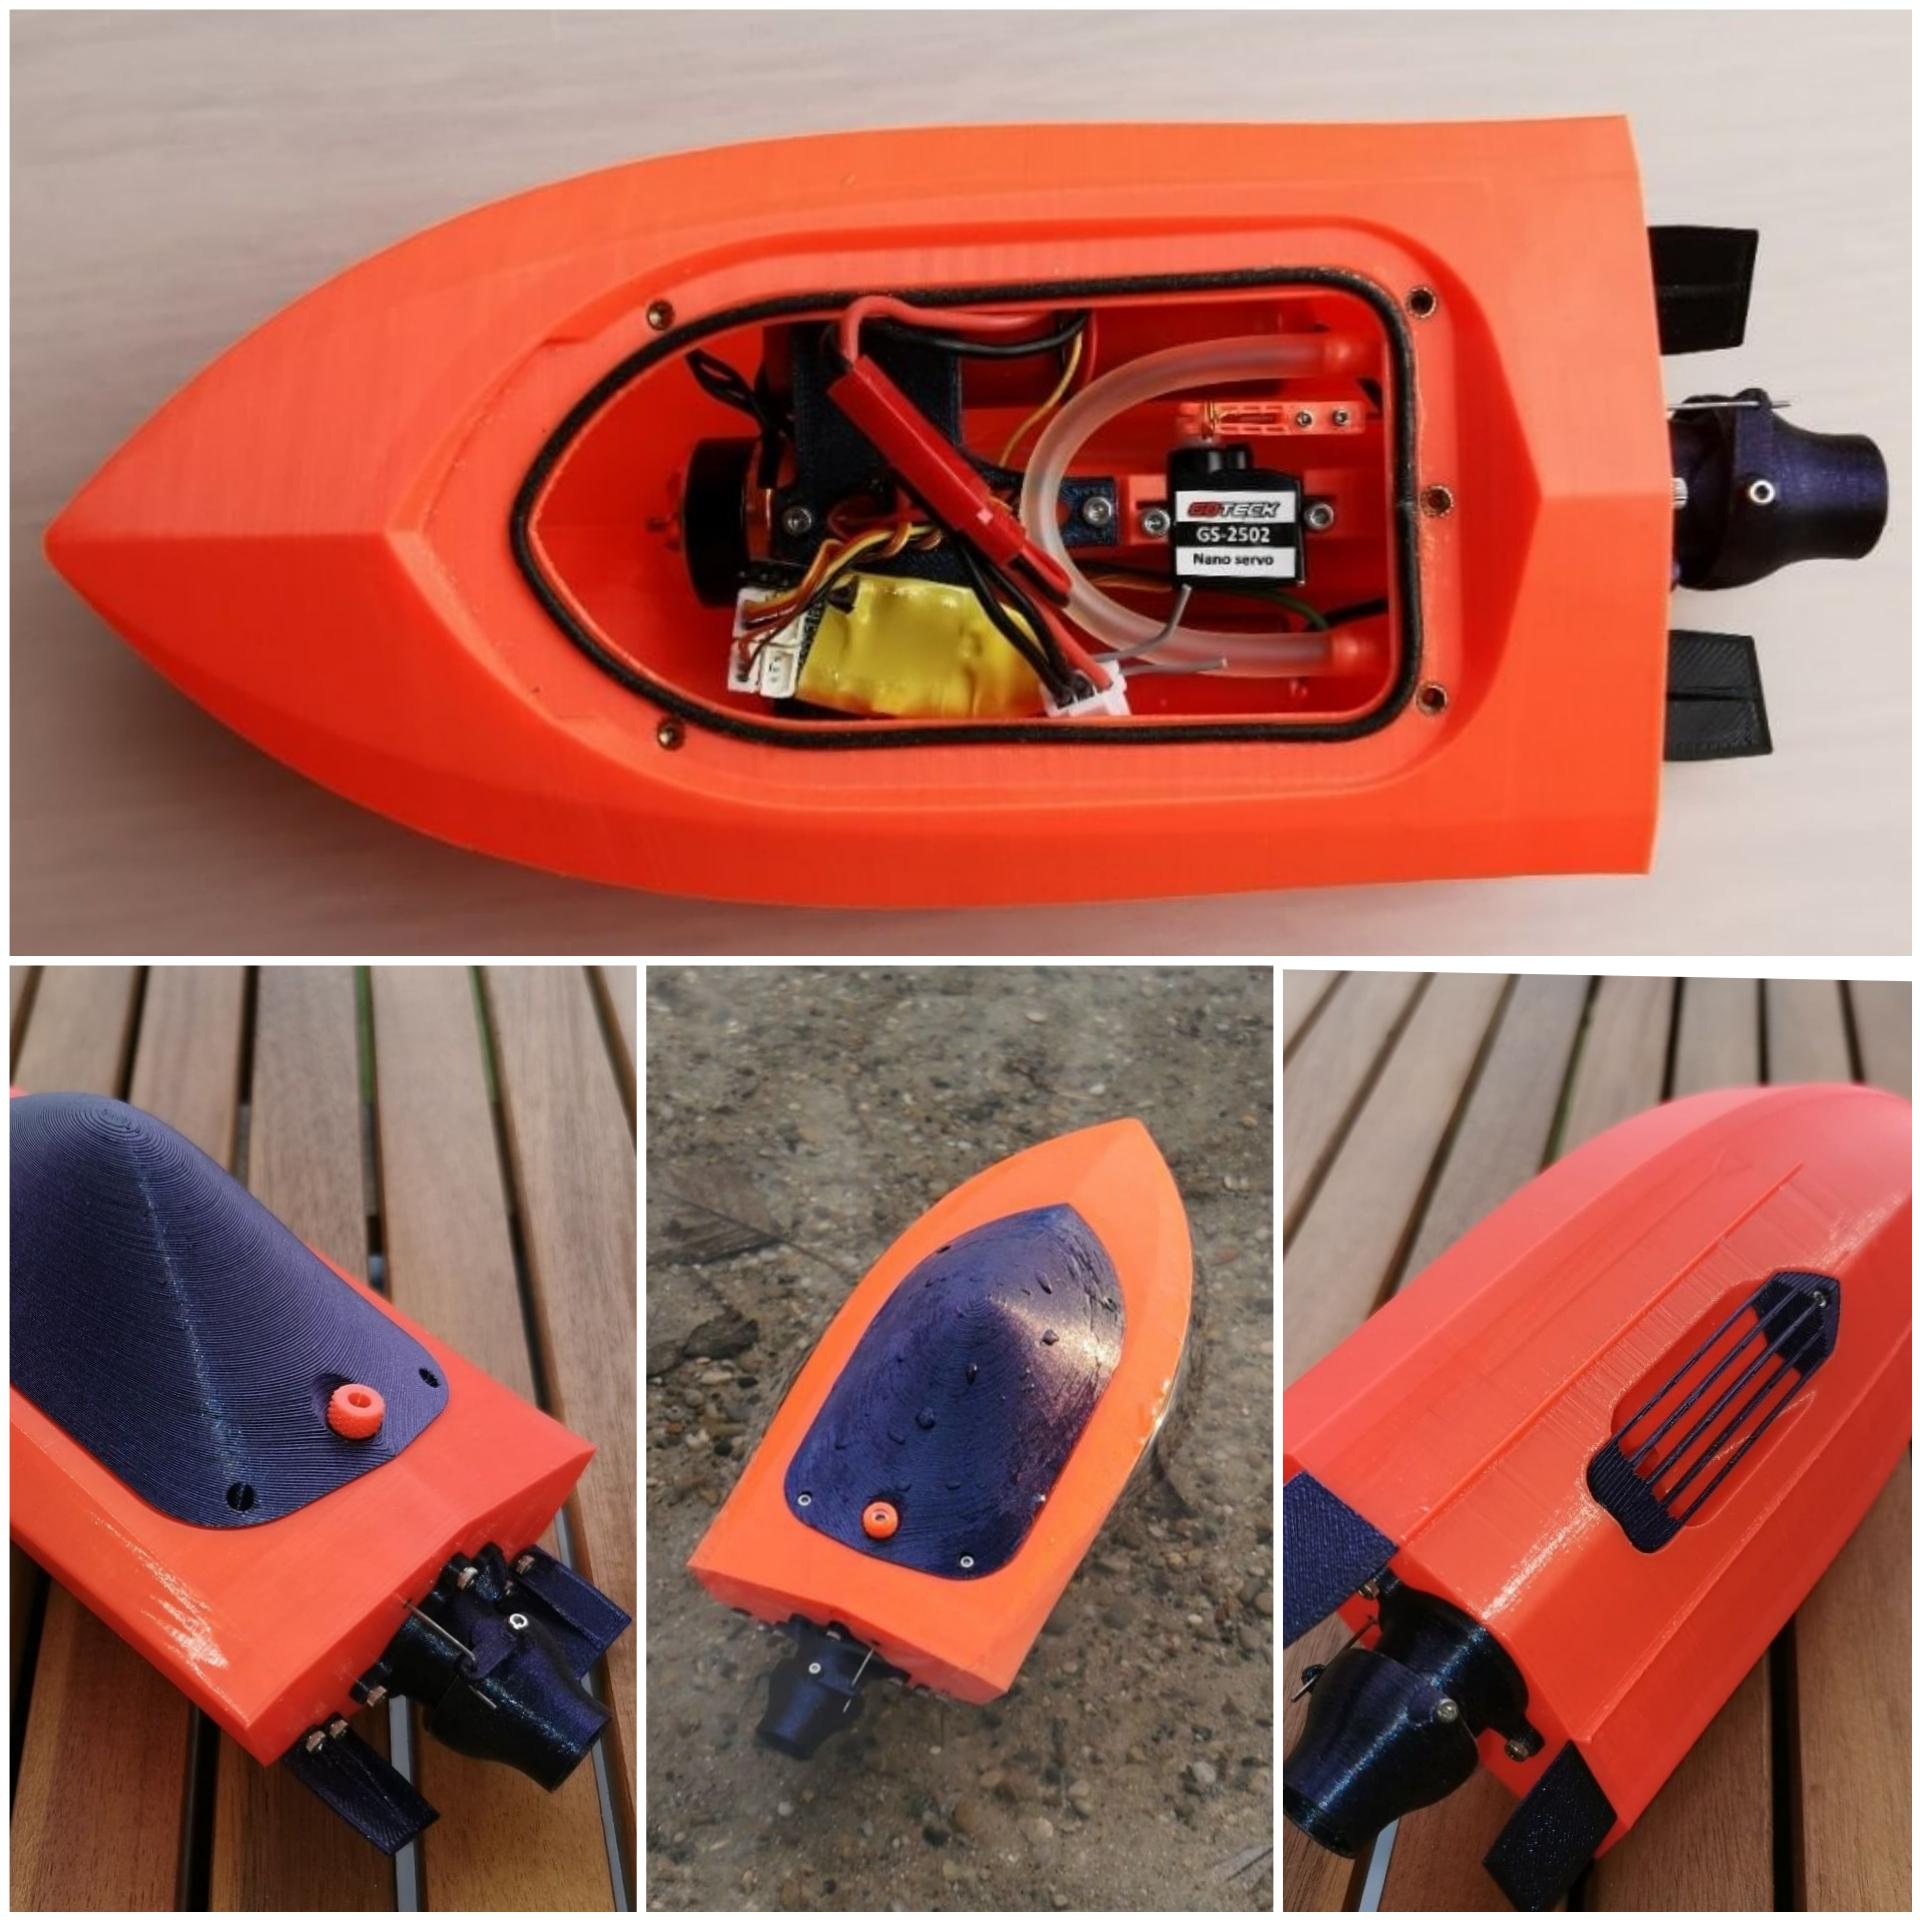 Mini Rc Jet Boat: Benefits of Mini RC Jet Boats: Entertainment, Easy to Use, Budget-Friendly, Social Activity, Stress Relief